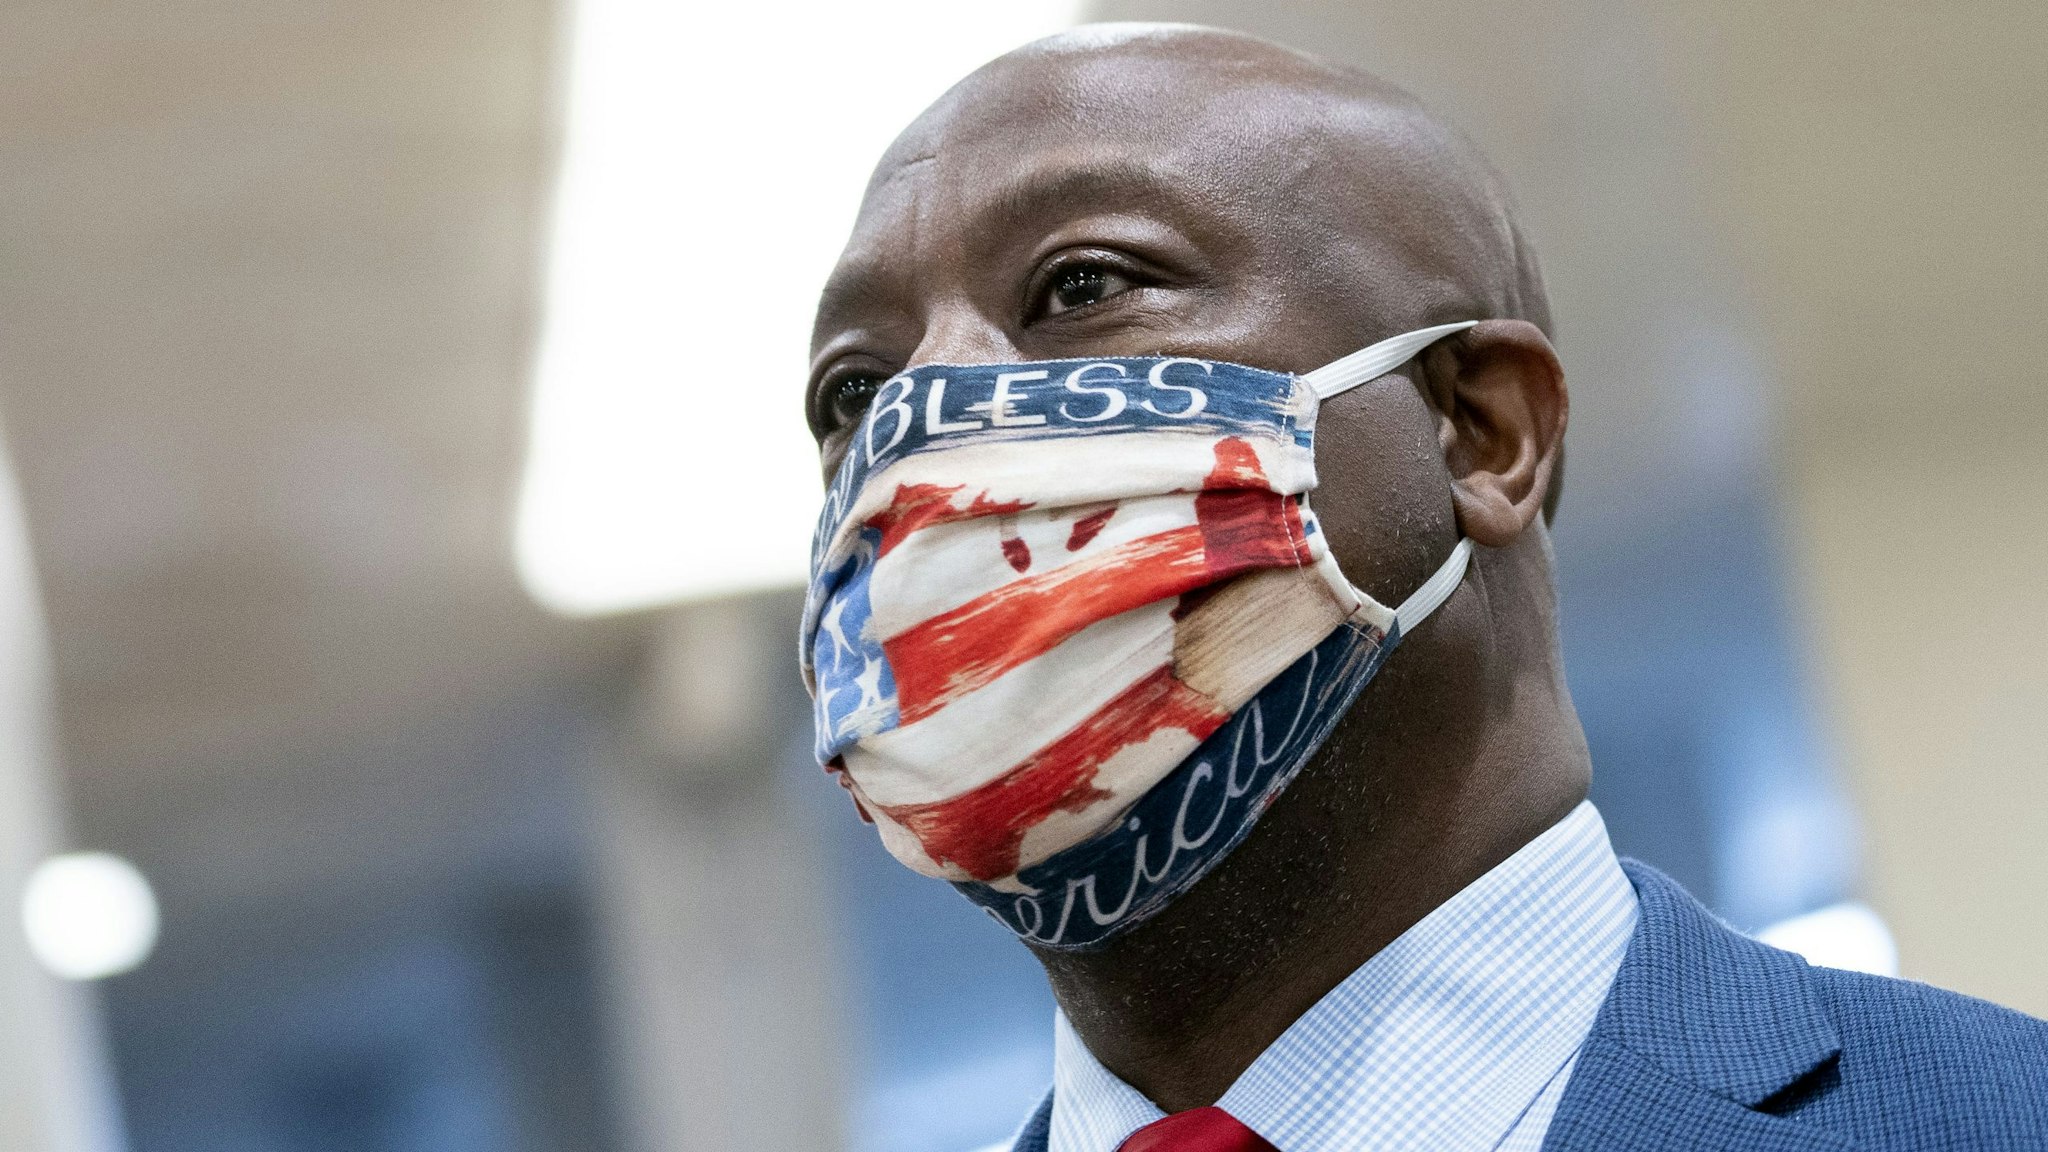 Senator Tim Scott, a Republican from South Carolina, wears a protective mask while walking through the Senate Subway of the U.S. Capitol in Washington, D.C., U.S., on Tuesday, Dec. 1, 2020. Senate Majority Leader Mitch McConnell said yesterday lawmakers need to finish government funding and defense policy bills before the end of the year and urged Congress to pass virus-relief legislation covering areas Democrats and Republicans agree on.